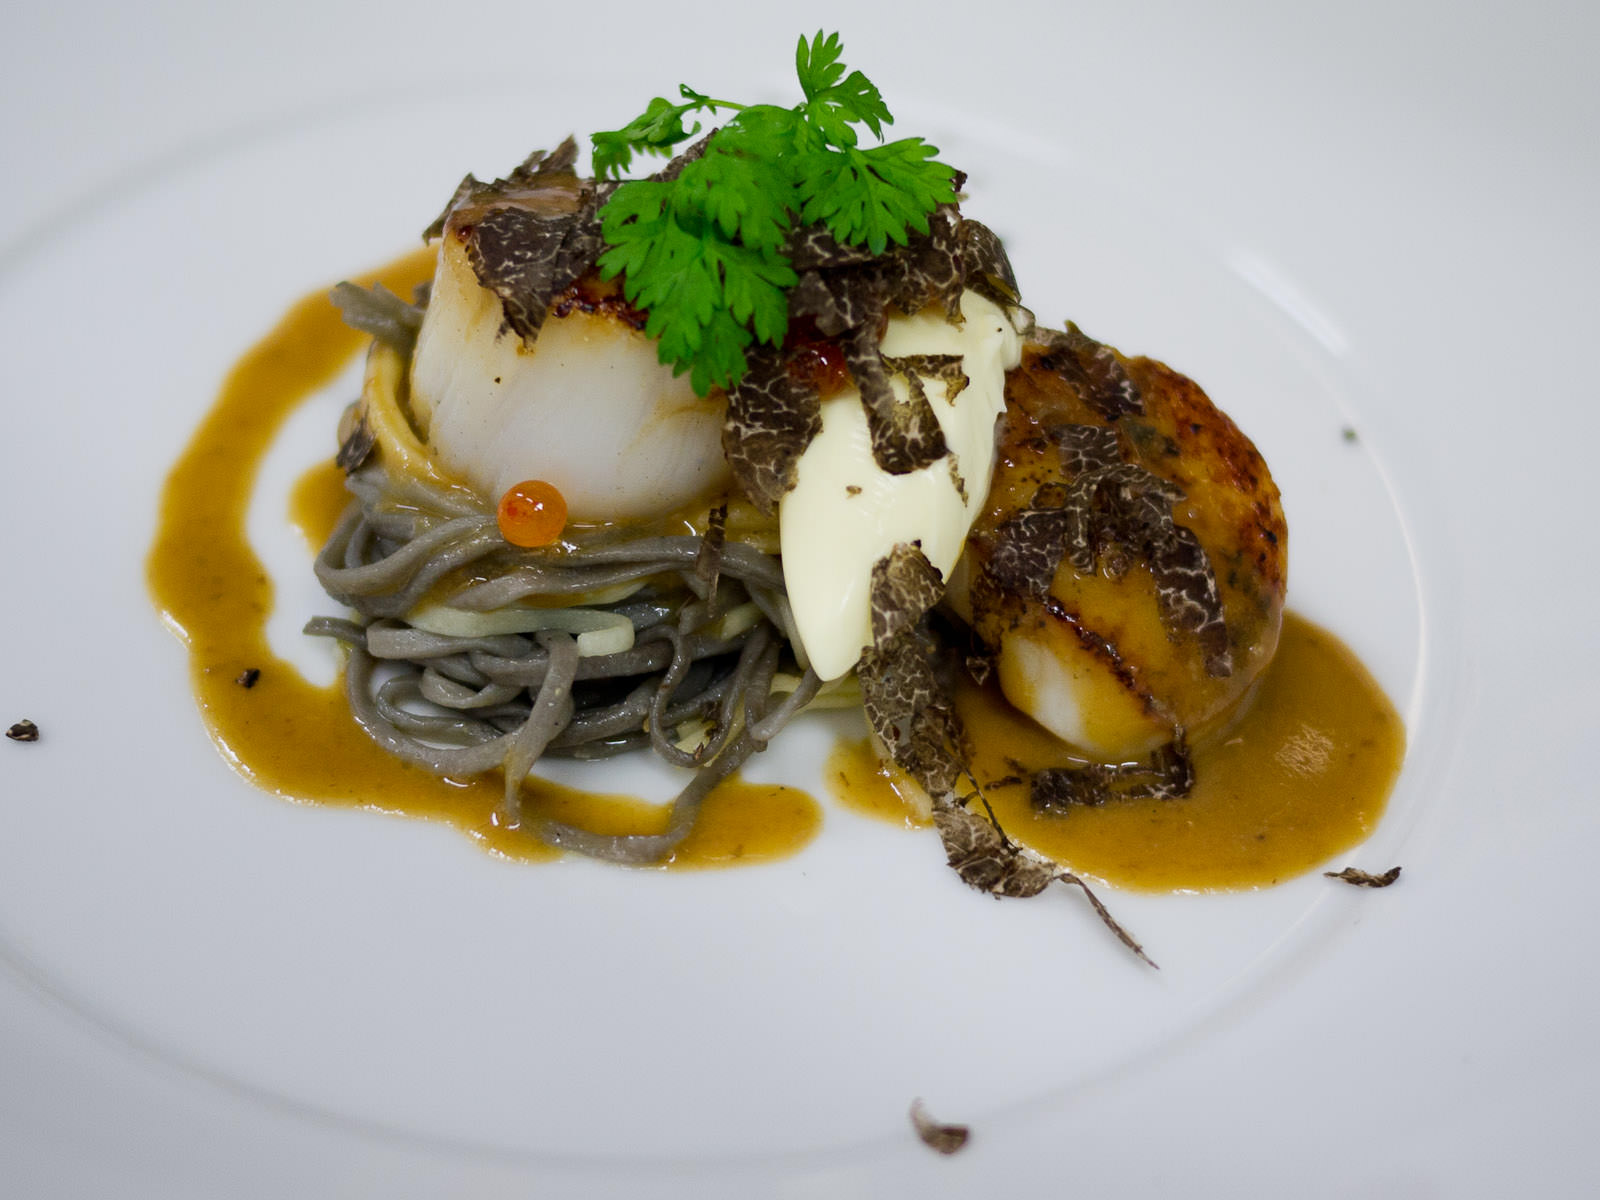 Seared scallops with angel hair pasta, creme fraiche and salmon roe